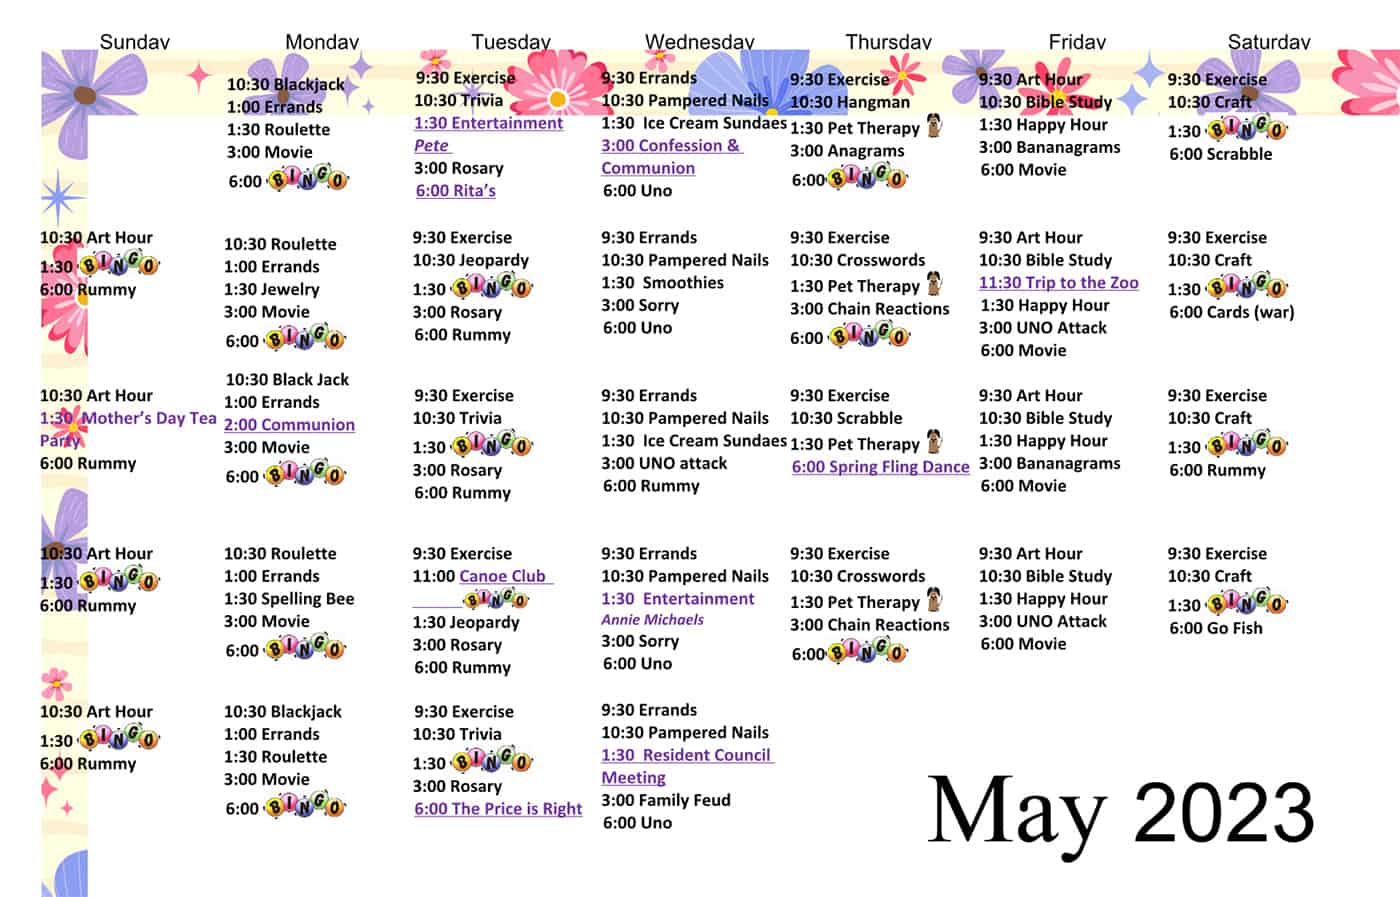 Our May 2023 Activity Calendar